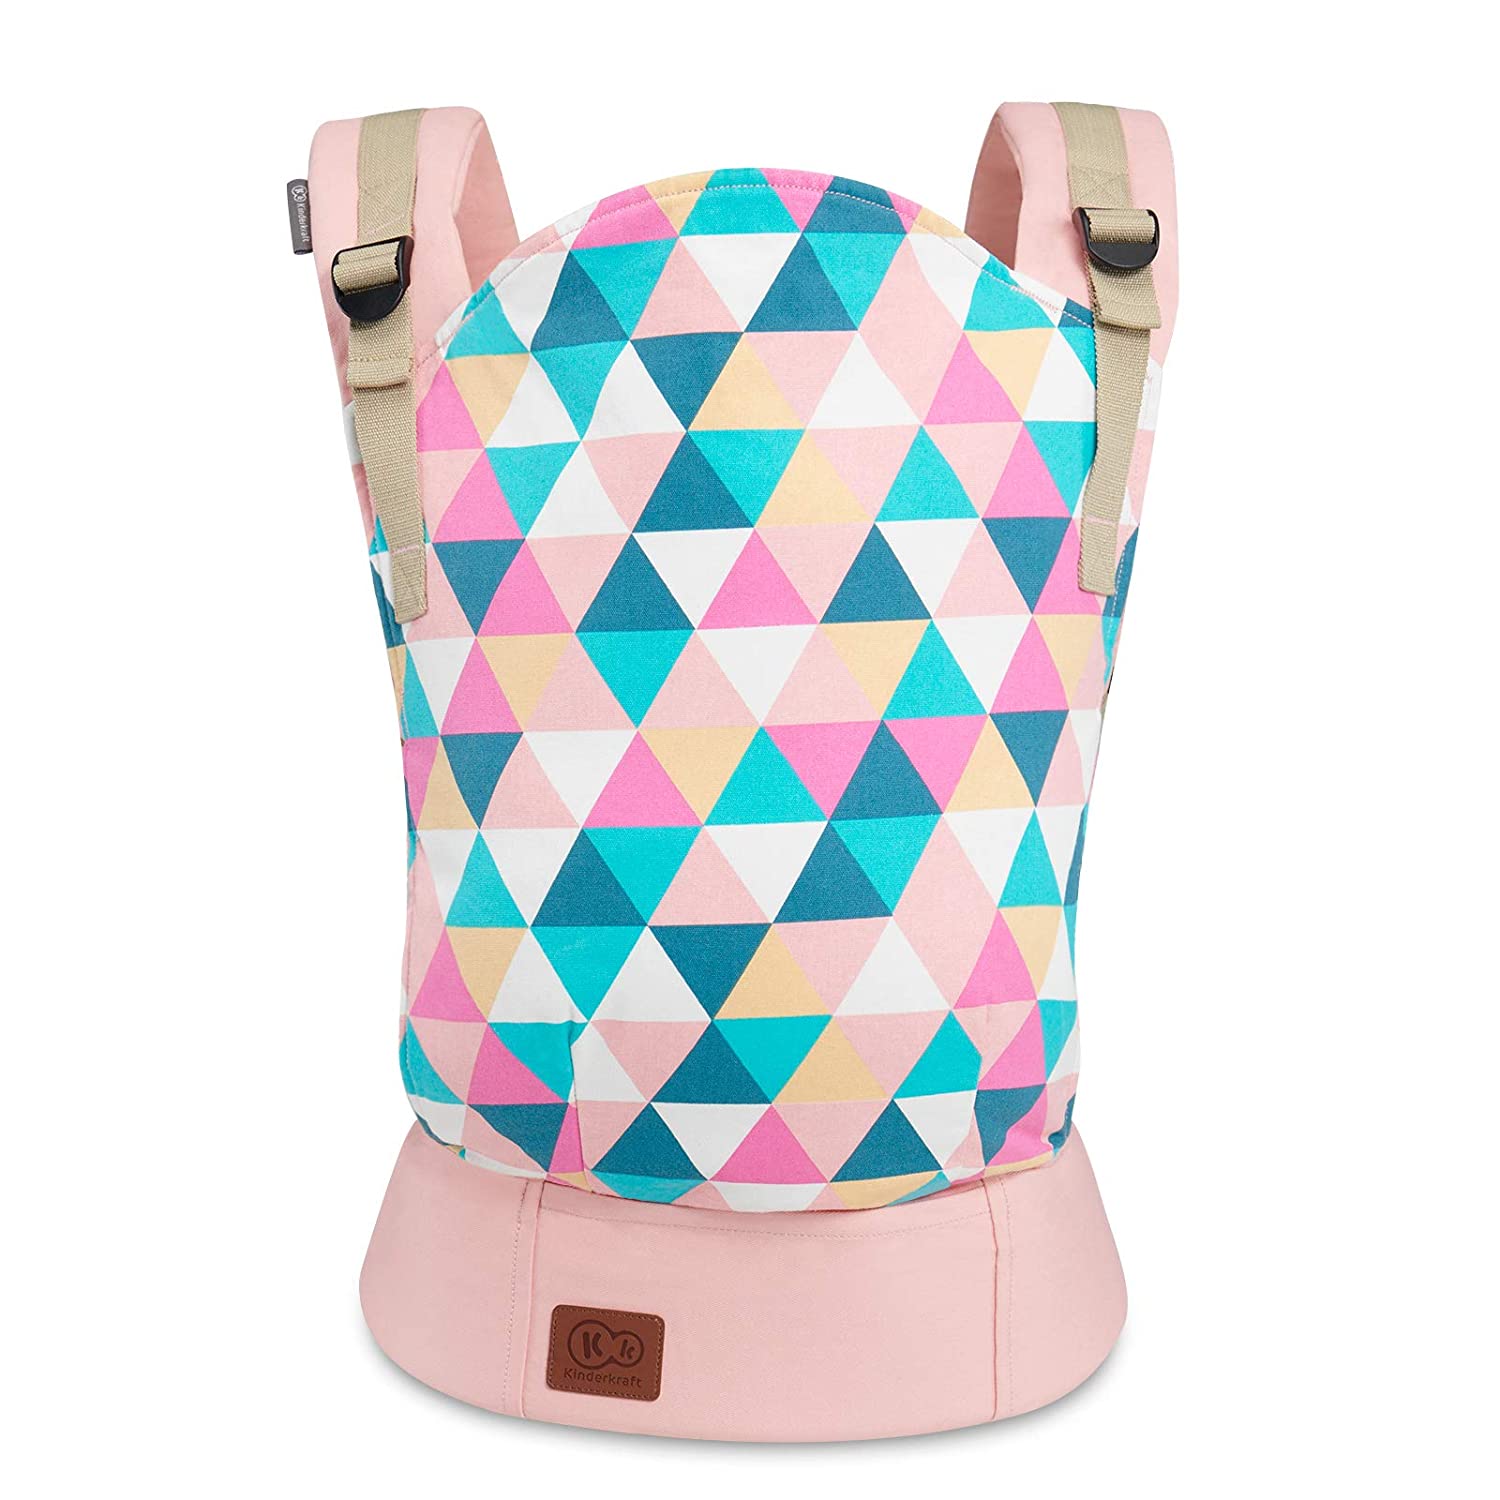 kk Kinderkraft Kinderkraft Nino Baby Carrier, Back Carrier, Belly Carrier for Infants and Toddlers, Baby Carrier, Child Carrier, Ergonomic, Made of Cotton, Lightweight Construction, from 3 Months to 20 kg, Pink